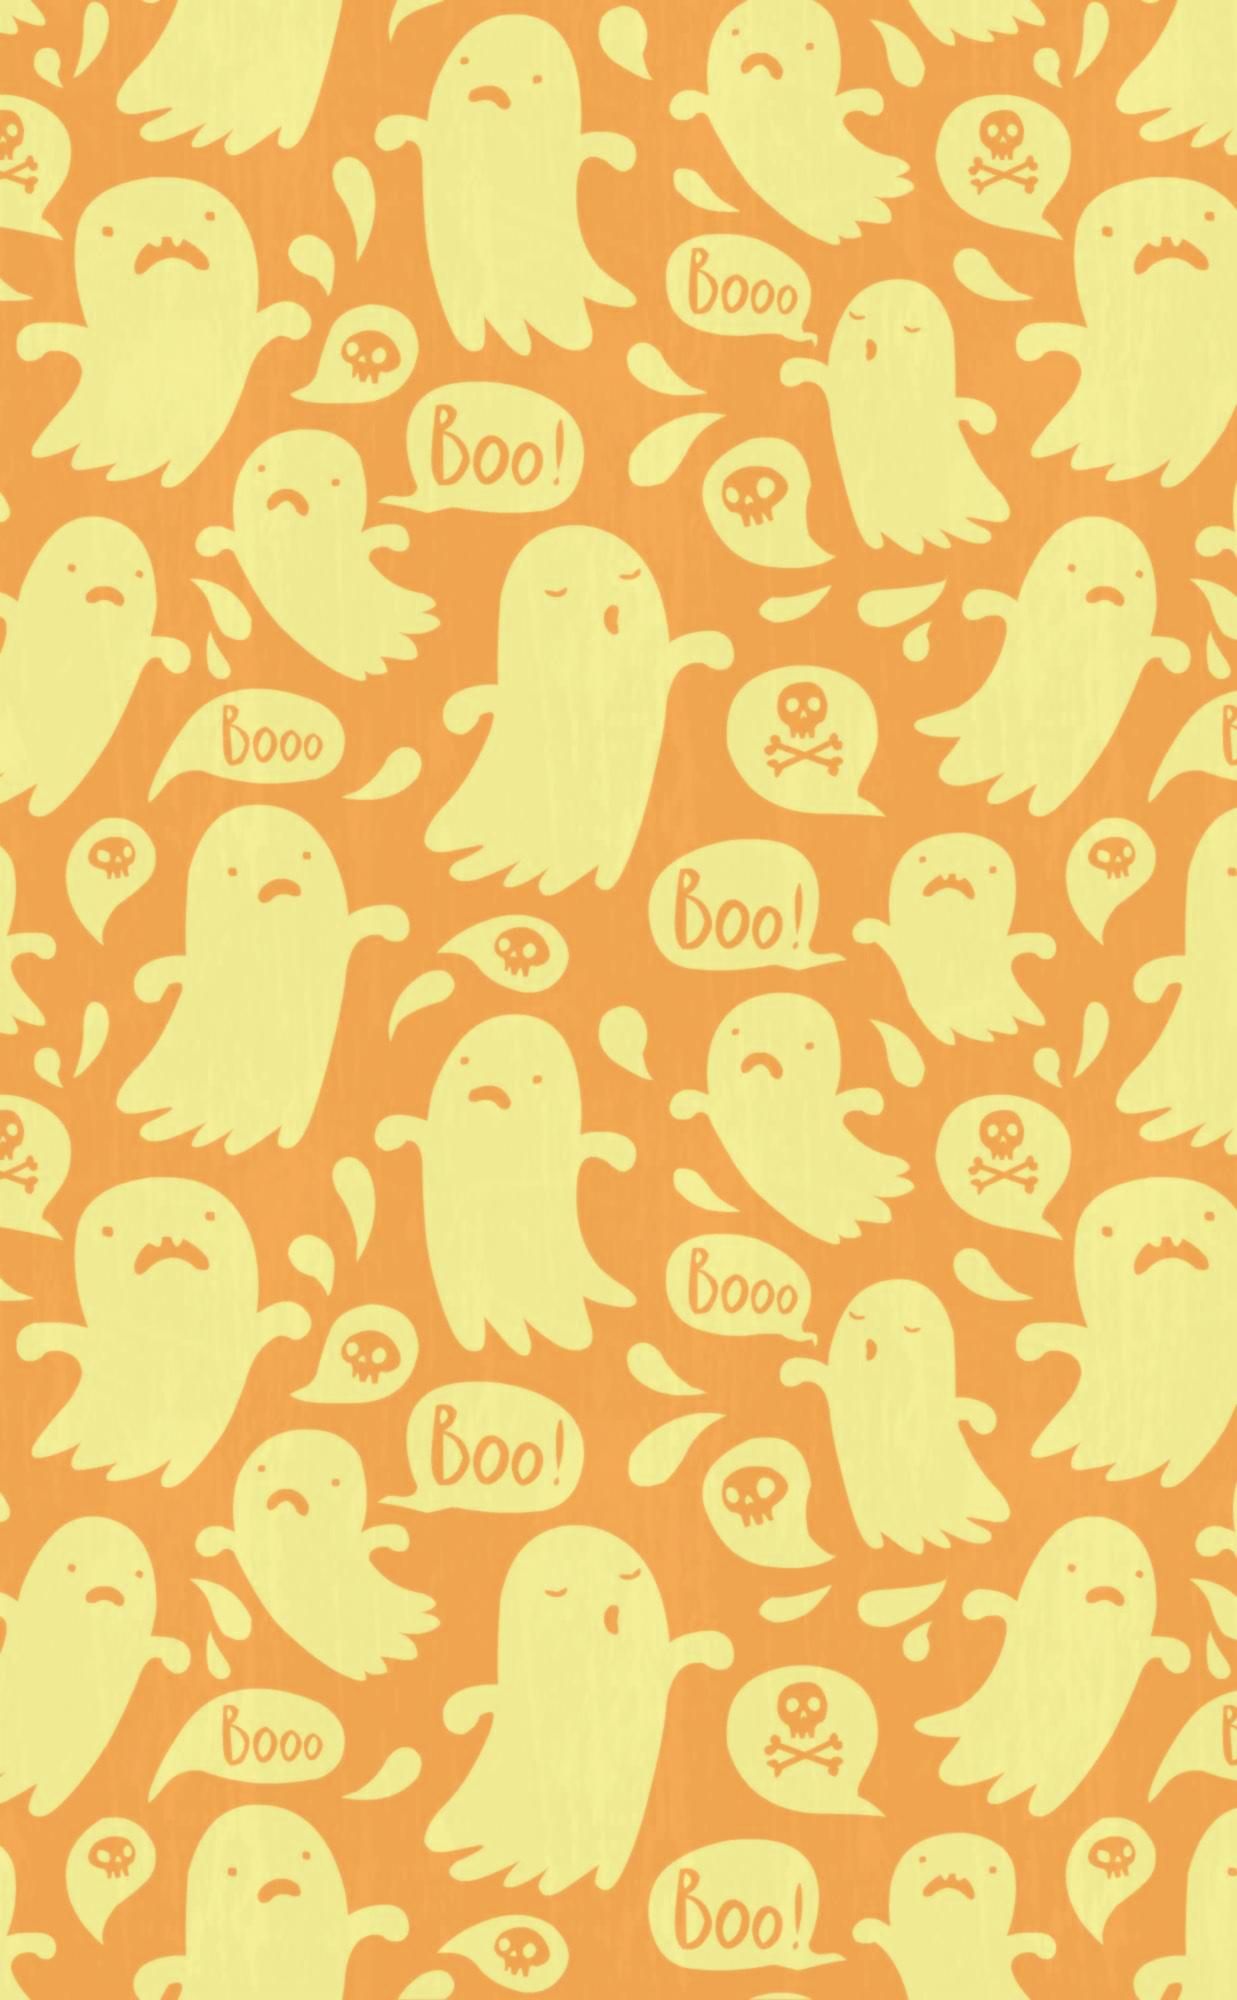 : a pattern of ghostly faces on an orange background - Ghost